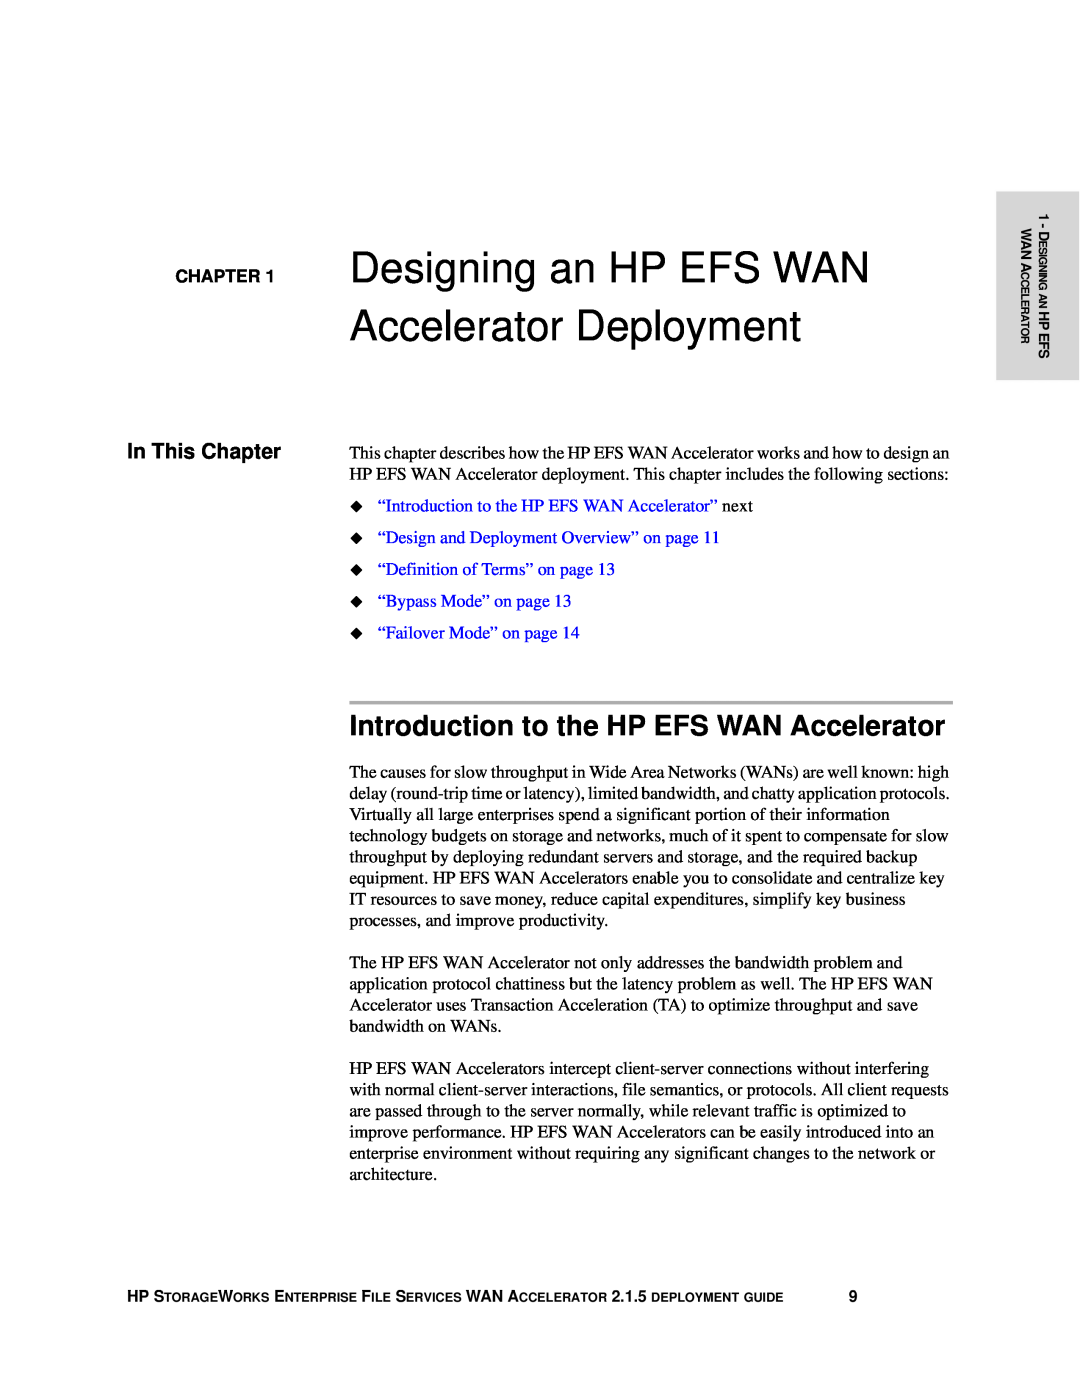 HP Enterprise File Services WAN Accelerator manual Designing an HP EFS WAN Accelerator Deployment, In This Chapter 